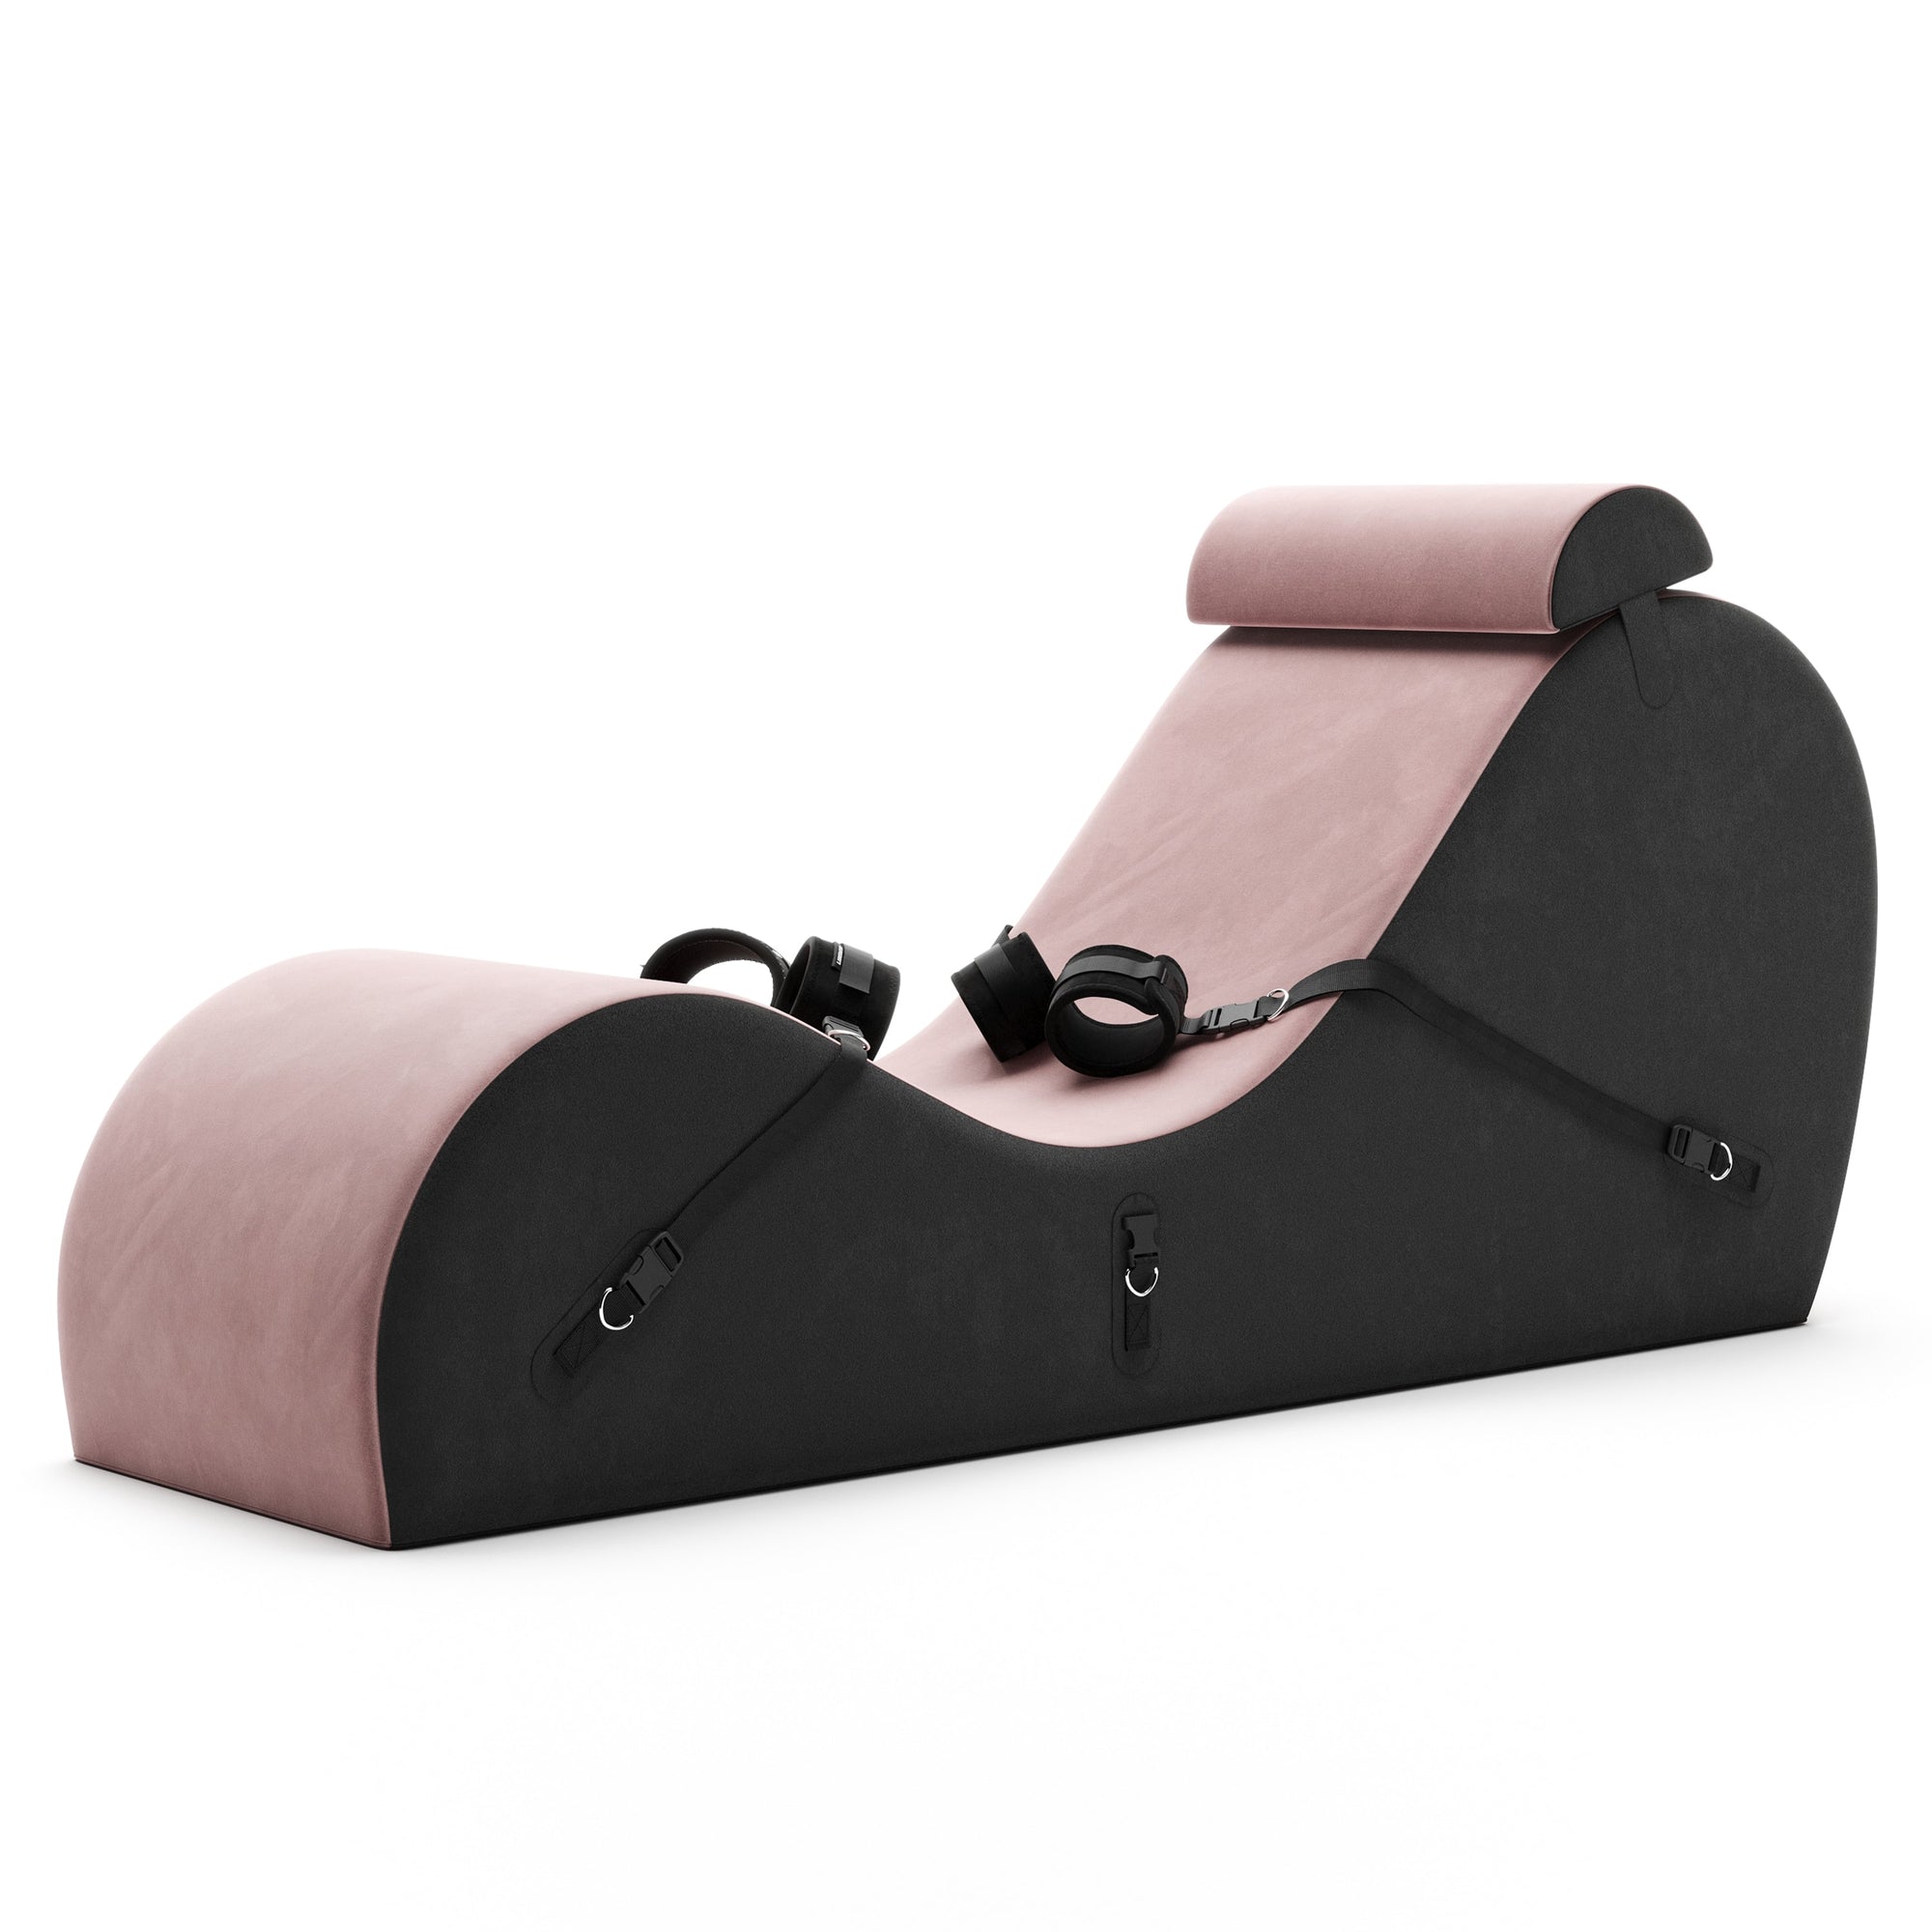 Liberator Cello Chaise Valkyrie Edition Couples Sensual Sex Position Aid Lounge